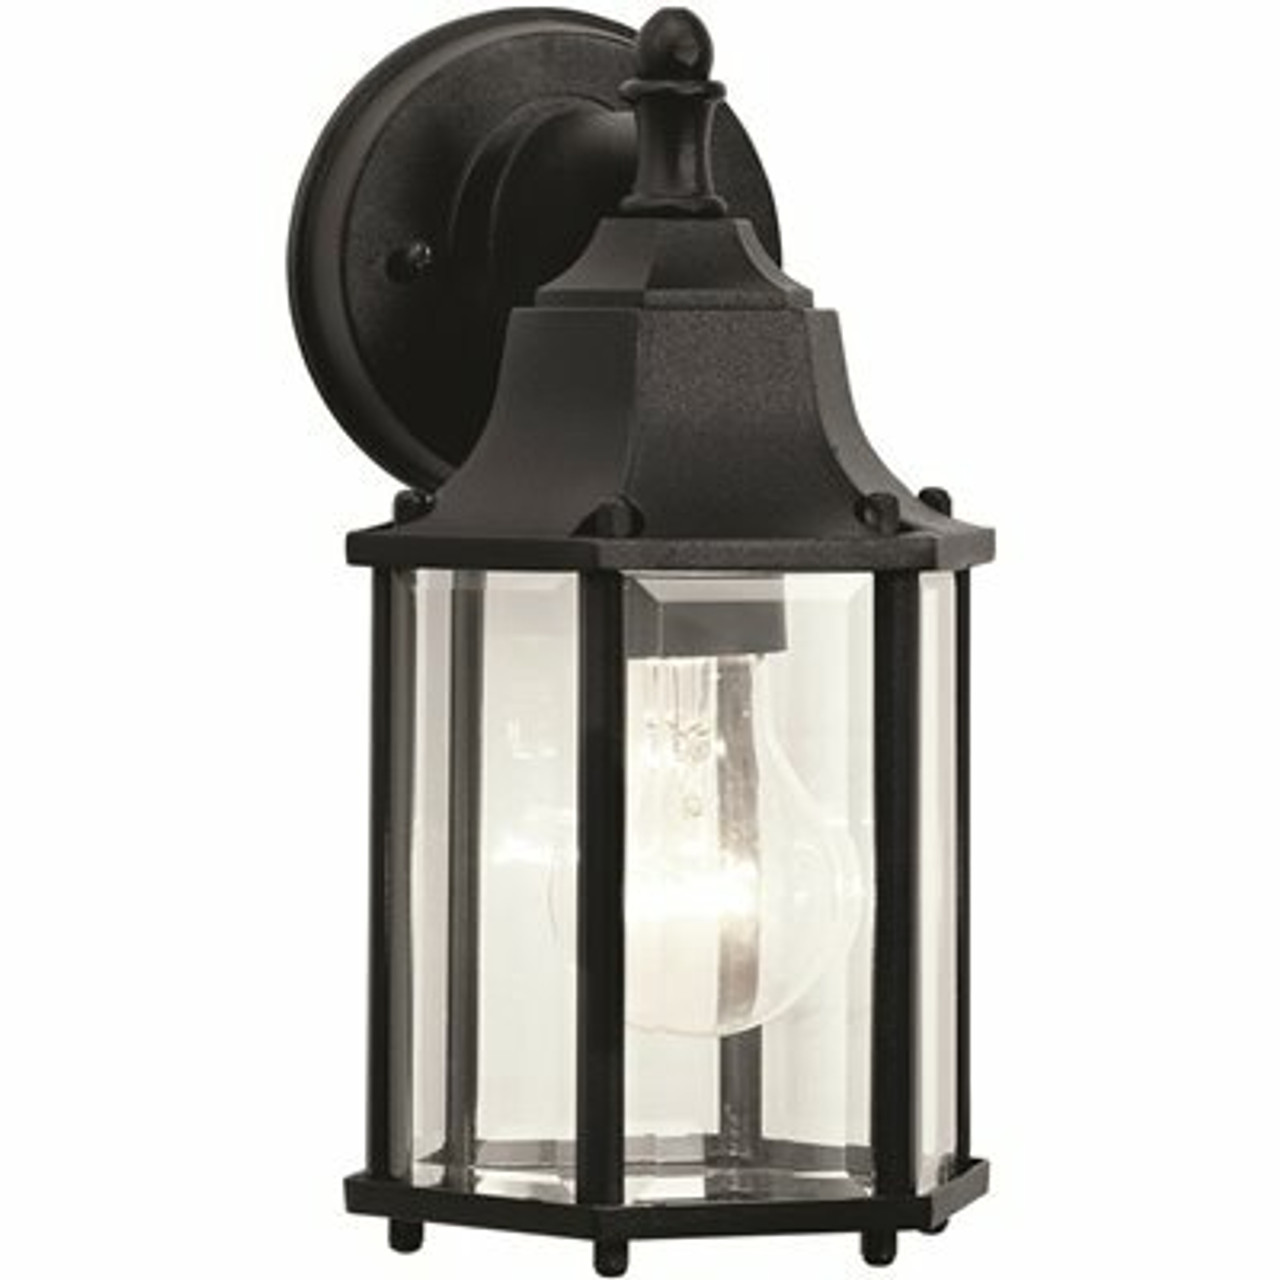 1-Light Small Textured Black On Cast Aluminum Outdoor Wall Lantern Sconce With Clear Beveled Glass Panels